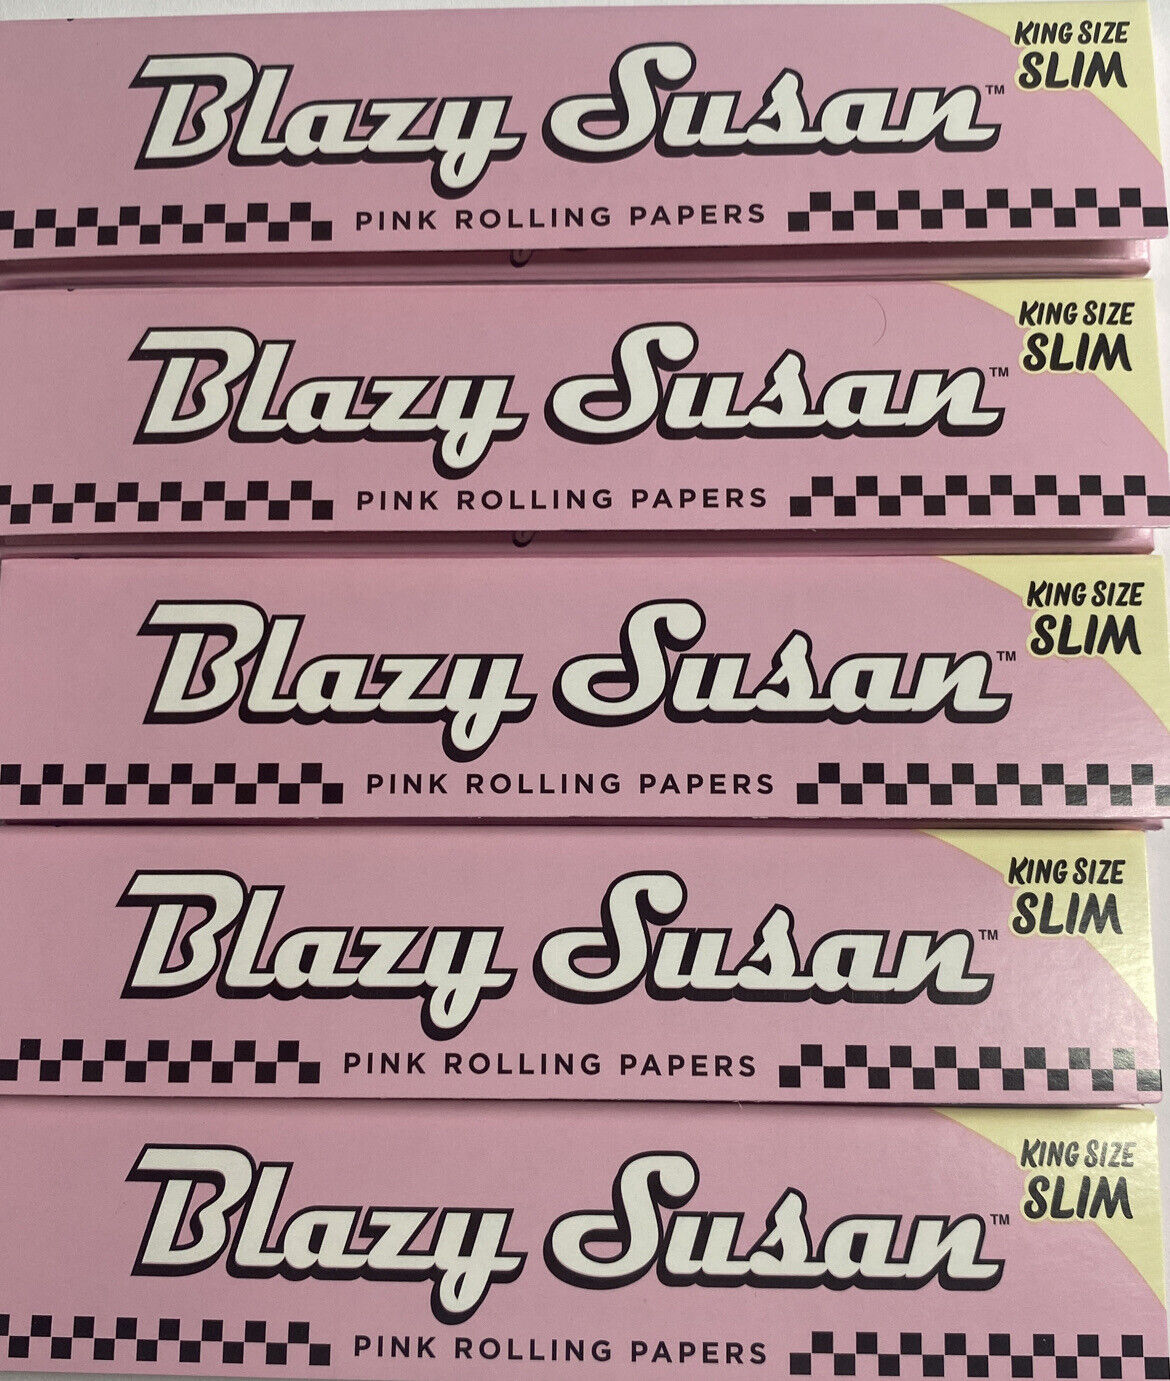 5 BLAZY Susan King Size GMO Chlorine Free Pink Rolling Papers 50 Leaves